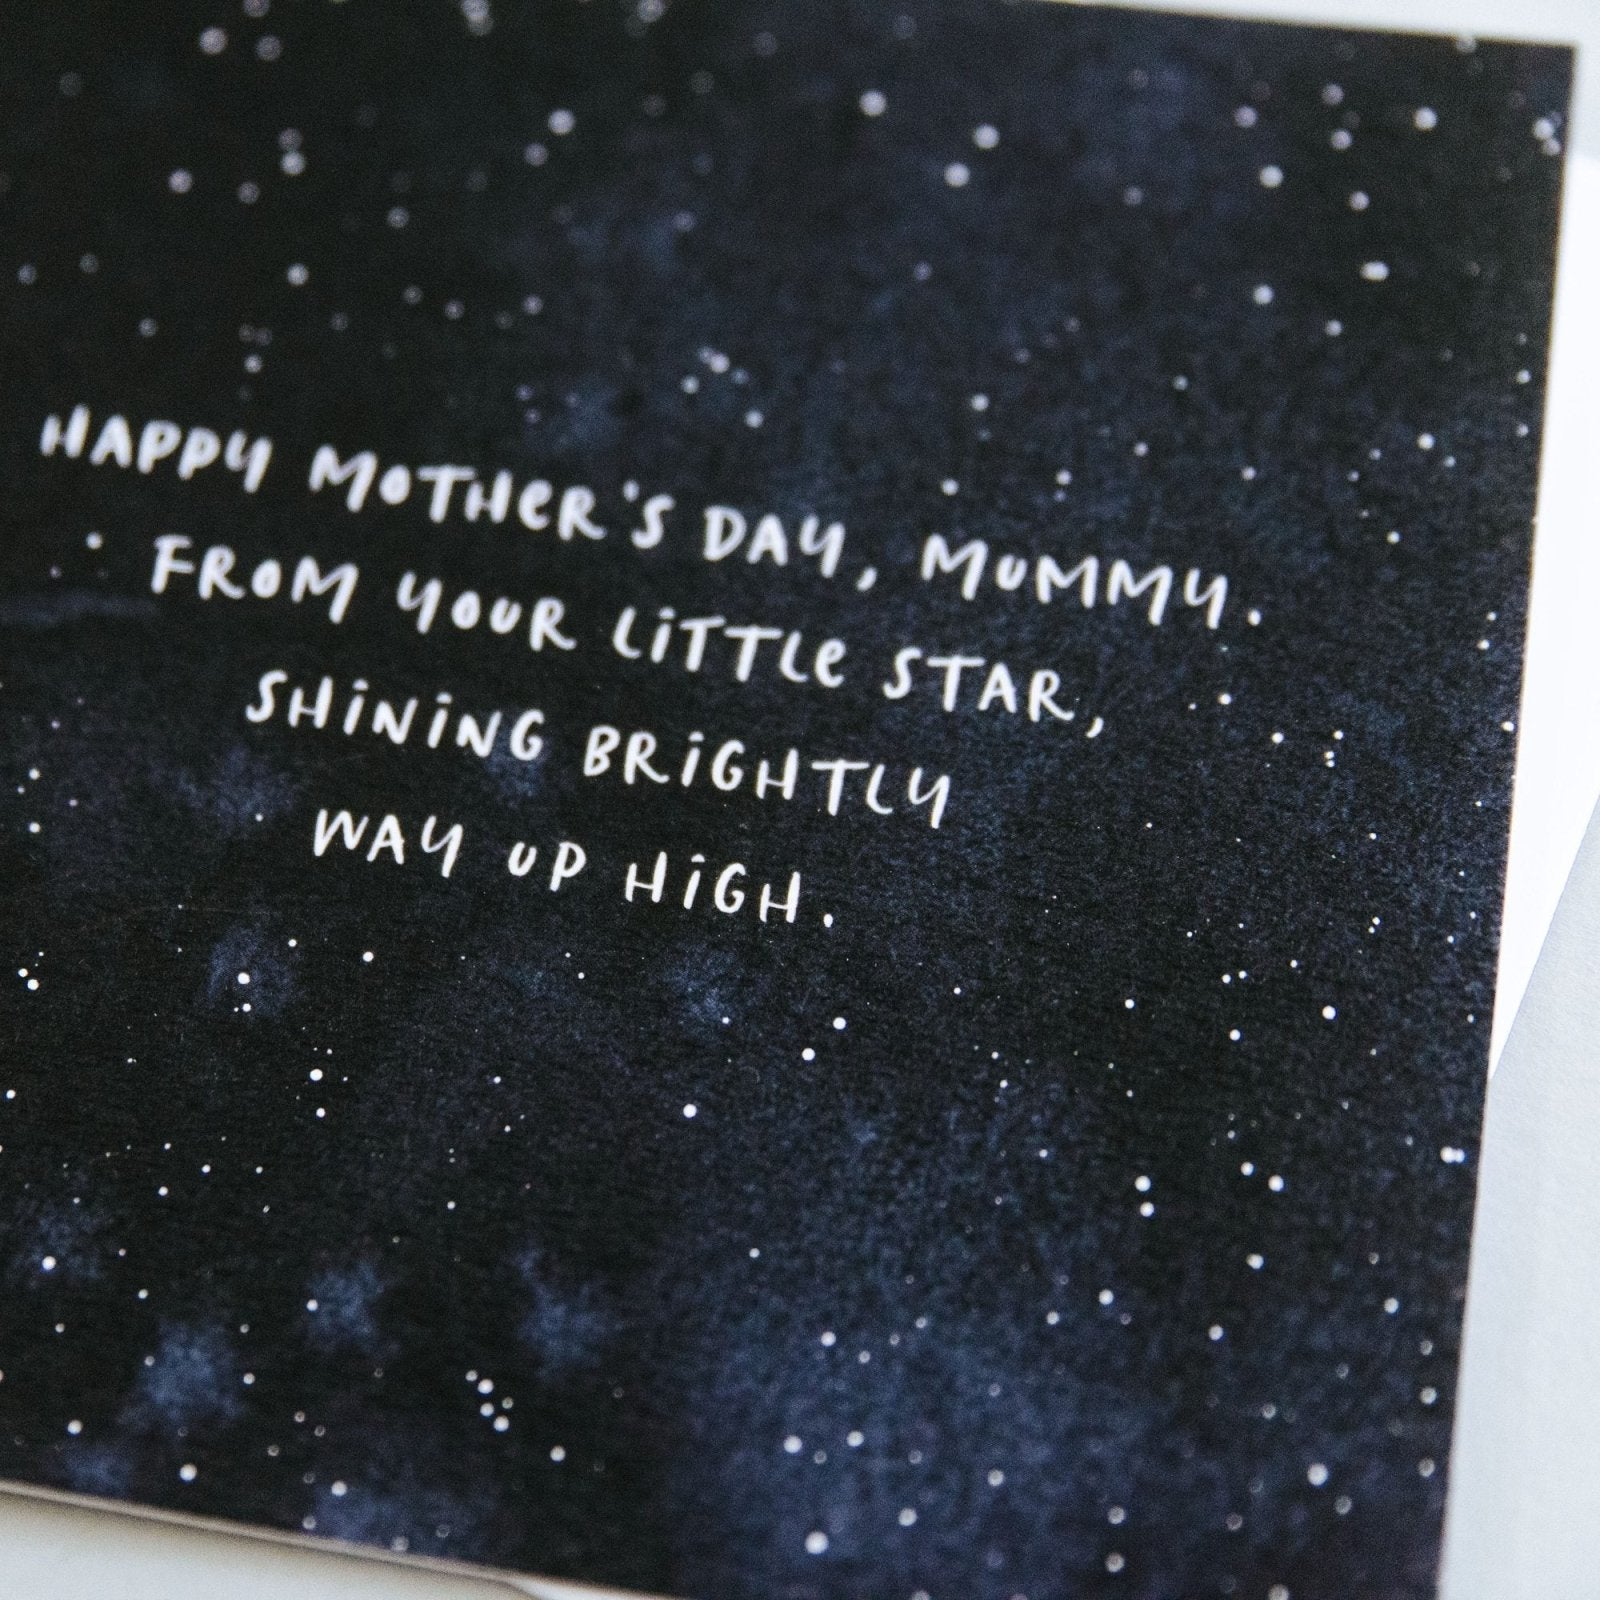 Bereaved Mother's Day Card "From Your Little Star" - I am Nat Ltd - Greeting Card